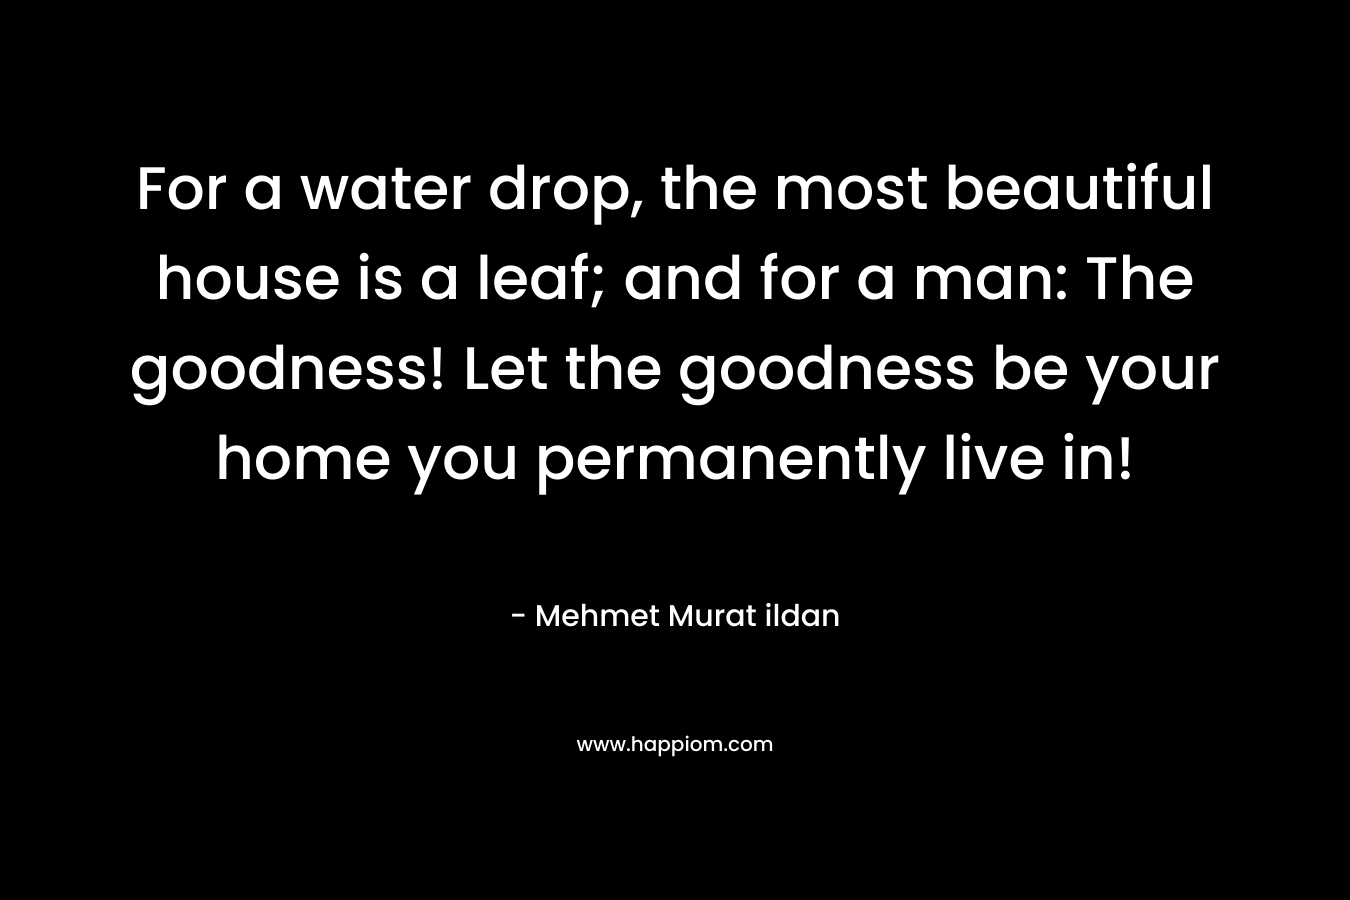 For a water drop, the most beautiful house is a leaf; and for a man: The goodness! Let the goodness be your home you permanently live in! – Mehmet Murat ildan